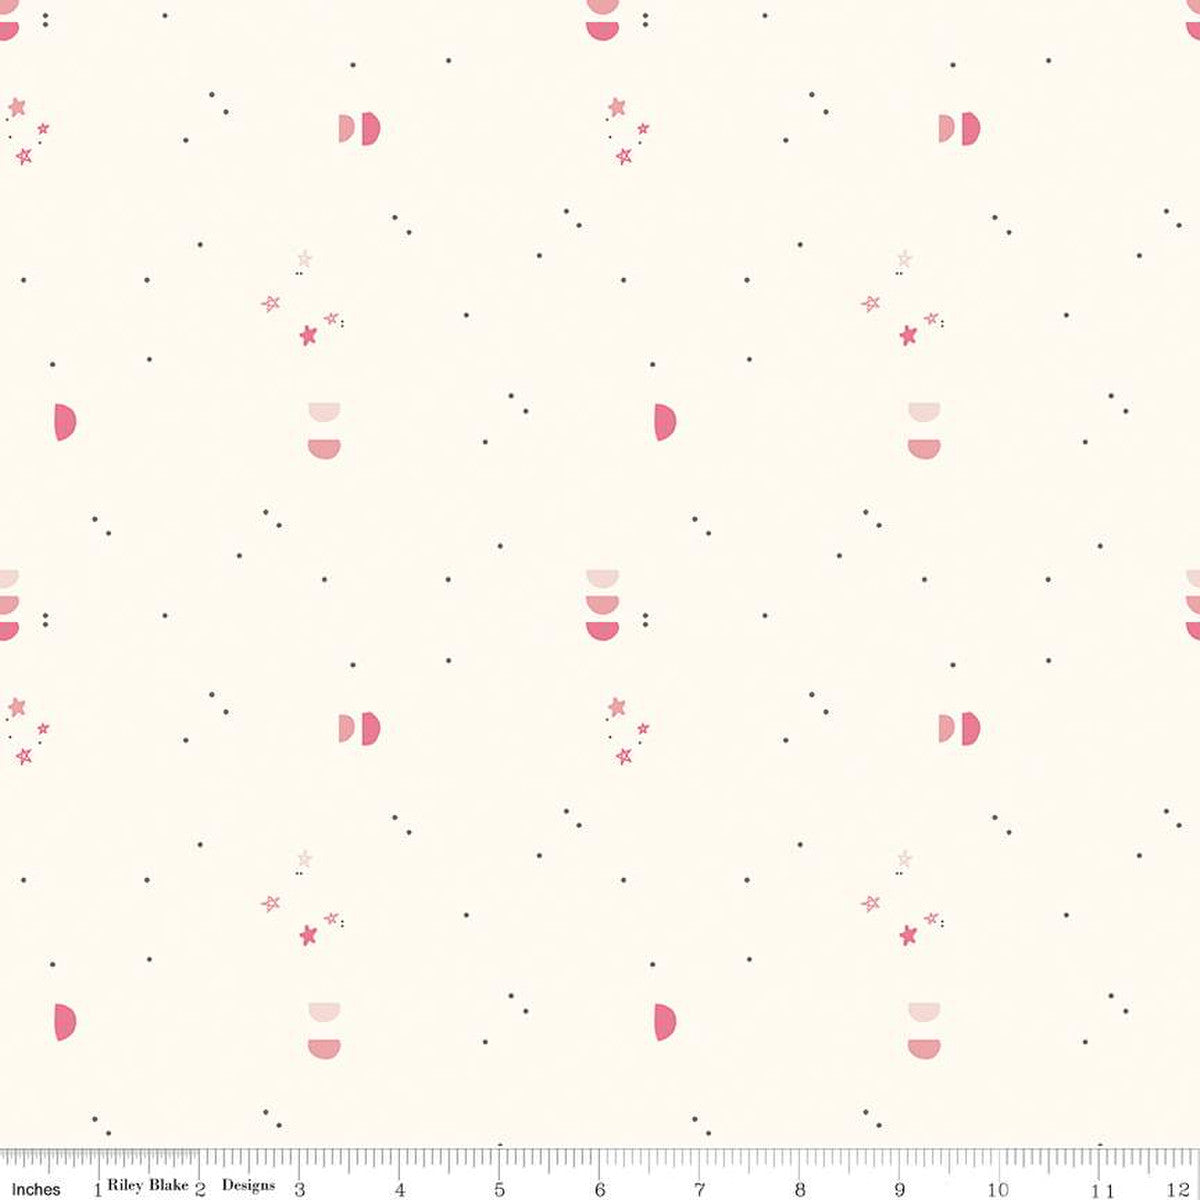 South Hill by Fran Gulick for Riley Blake designs fabric low volume blush pink confetti shapes and navy pindots on cream background tone on tone quilt weight fabric for quilting sewing garments clothing 